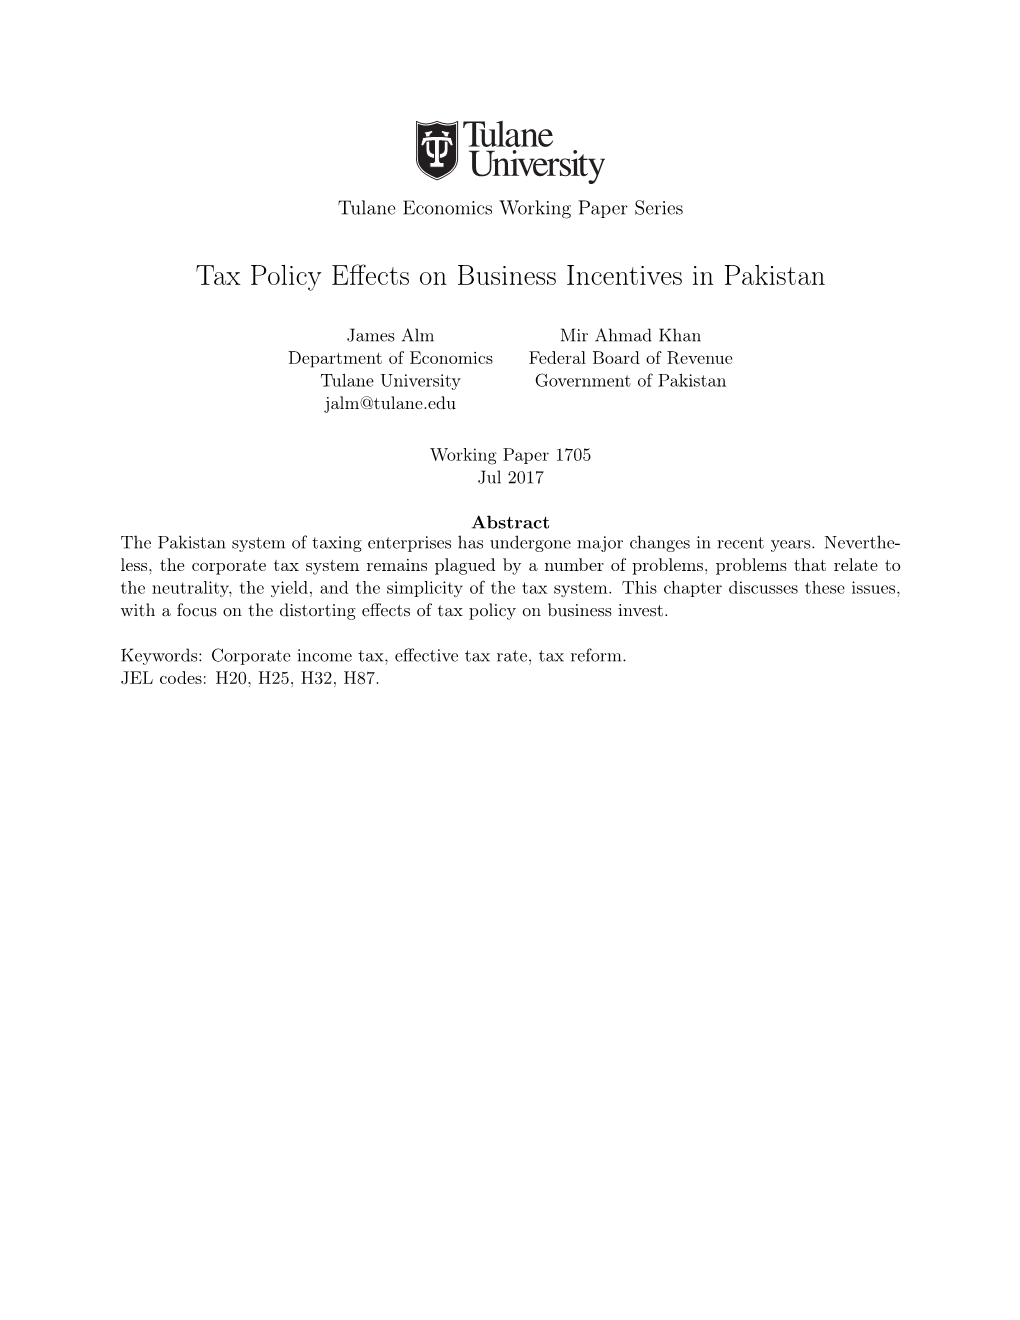 Tax Policy Effects on Business Incentives in Pakistan